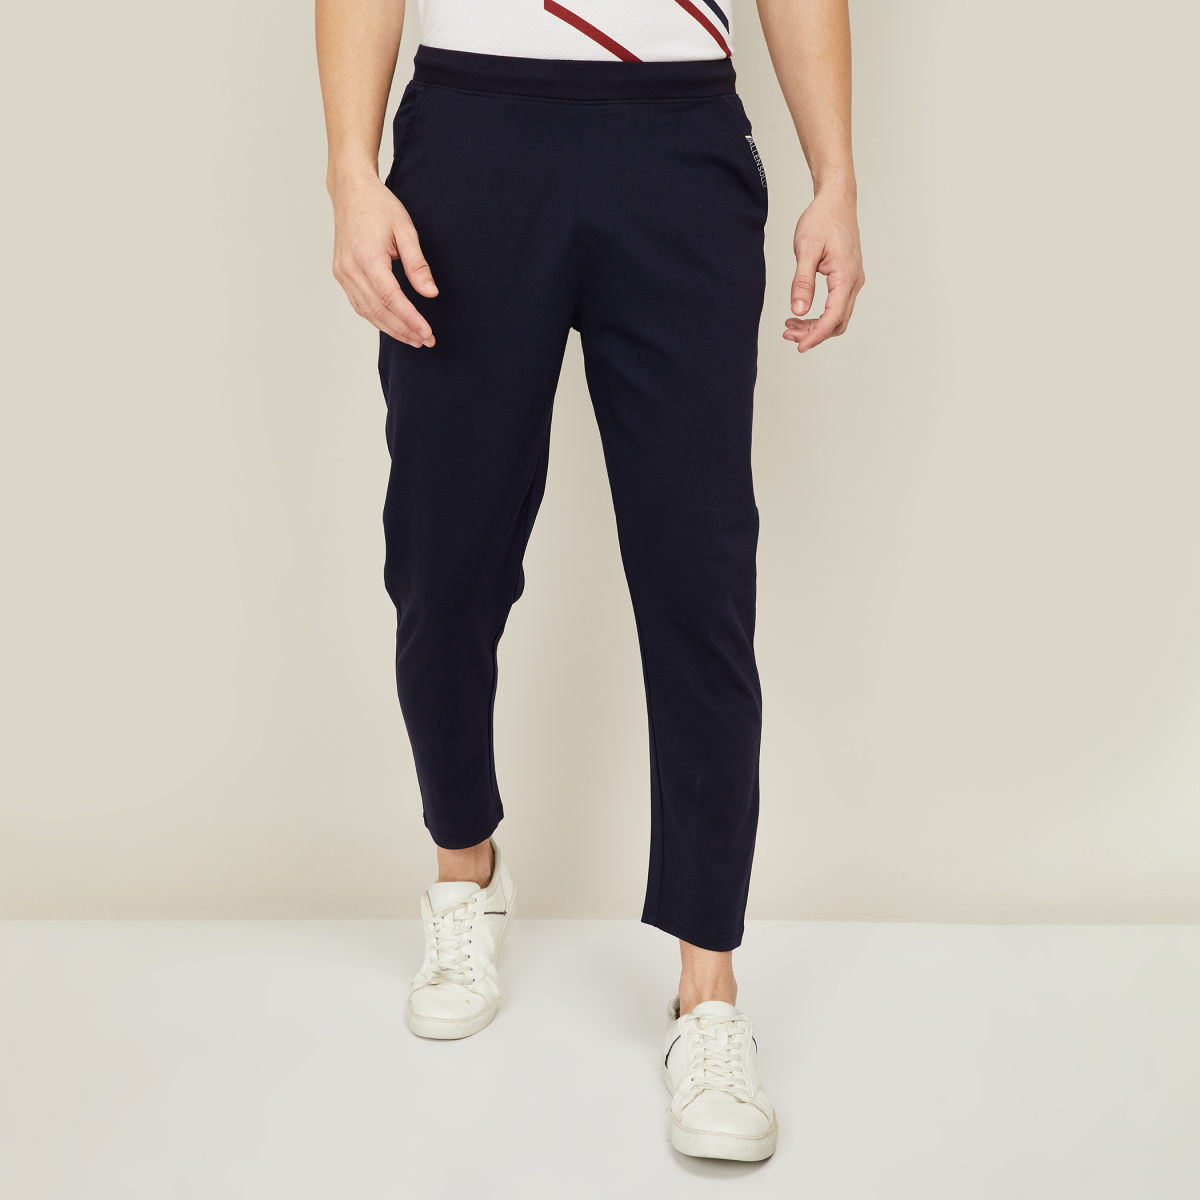 Buy Allen Solly Women Black Slim fit Regular trousers Online at Low Prices  in India - Paytmmall.com